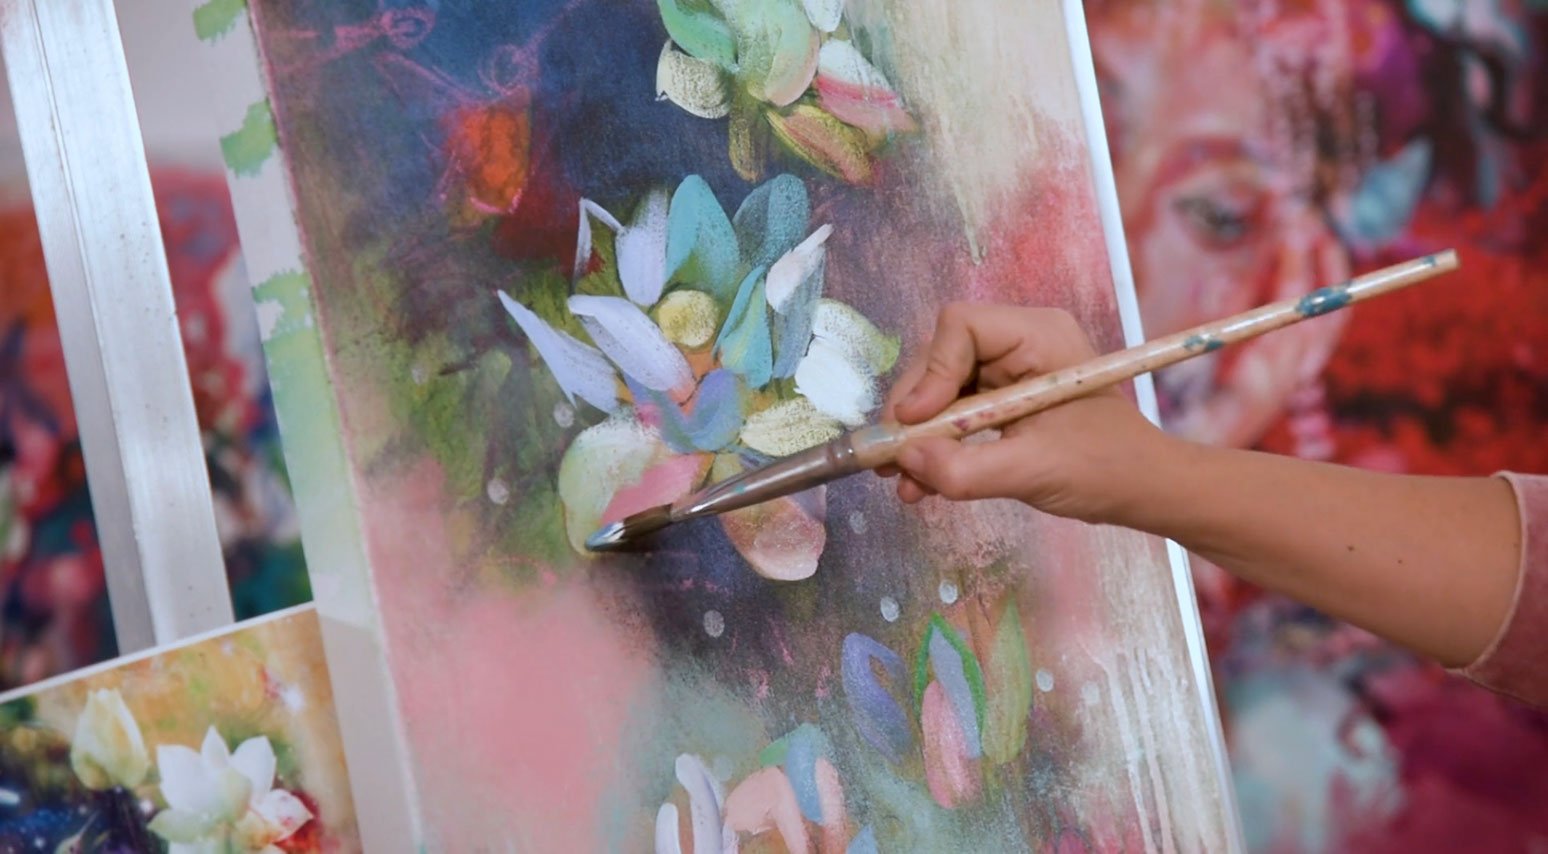 Quick Tips for Artists: The Vibrant Impact of an Artist’s Brush Strokes